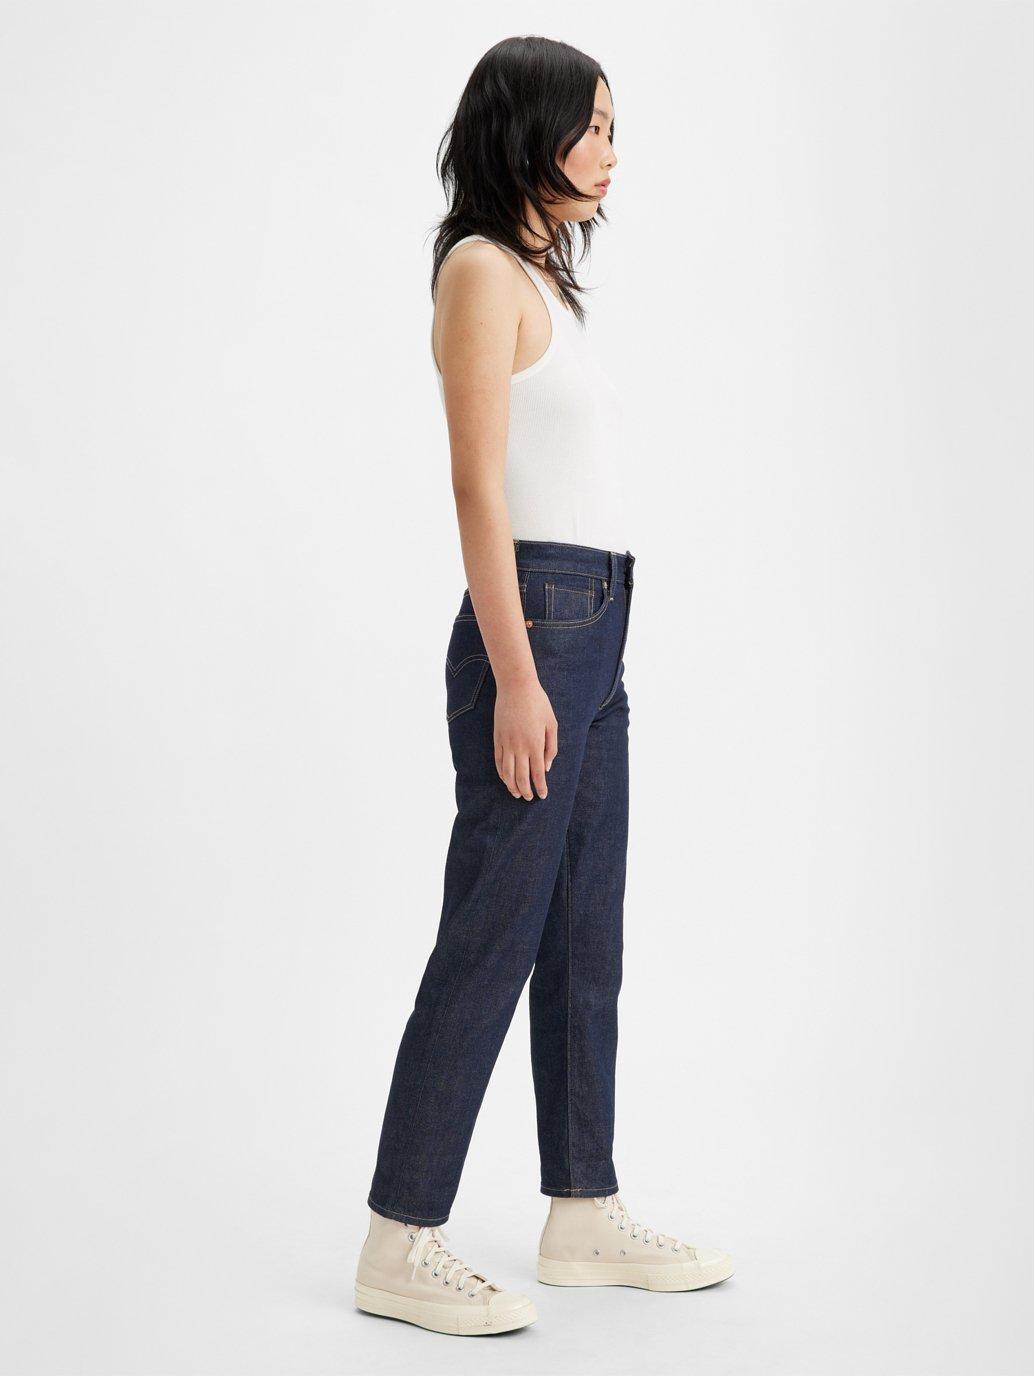 Buy Levi's® Women's Made in Japan High-Rise Boyfriend Jeans | Levi's®  Official Online Store MY